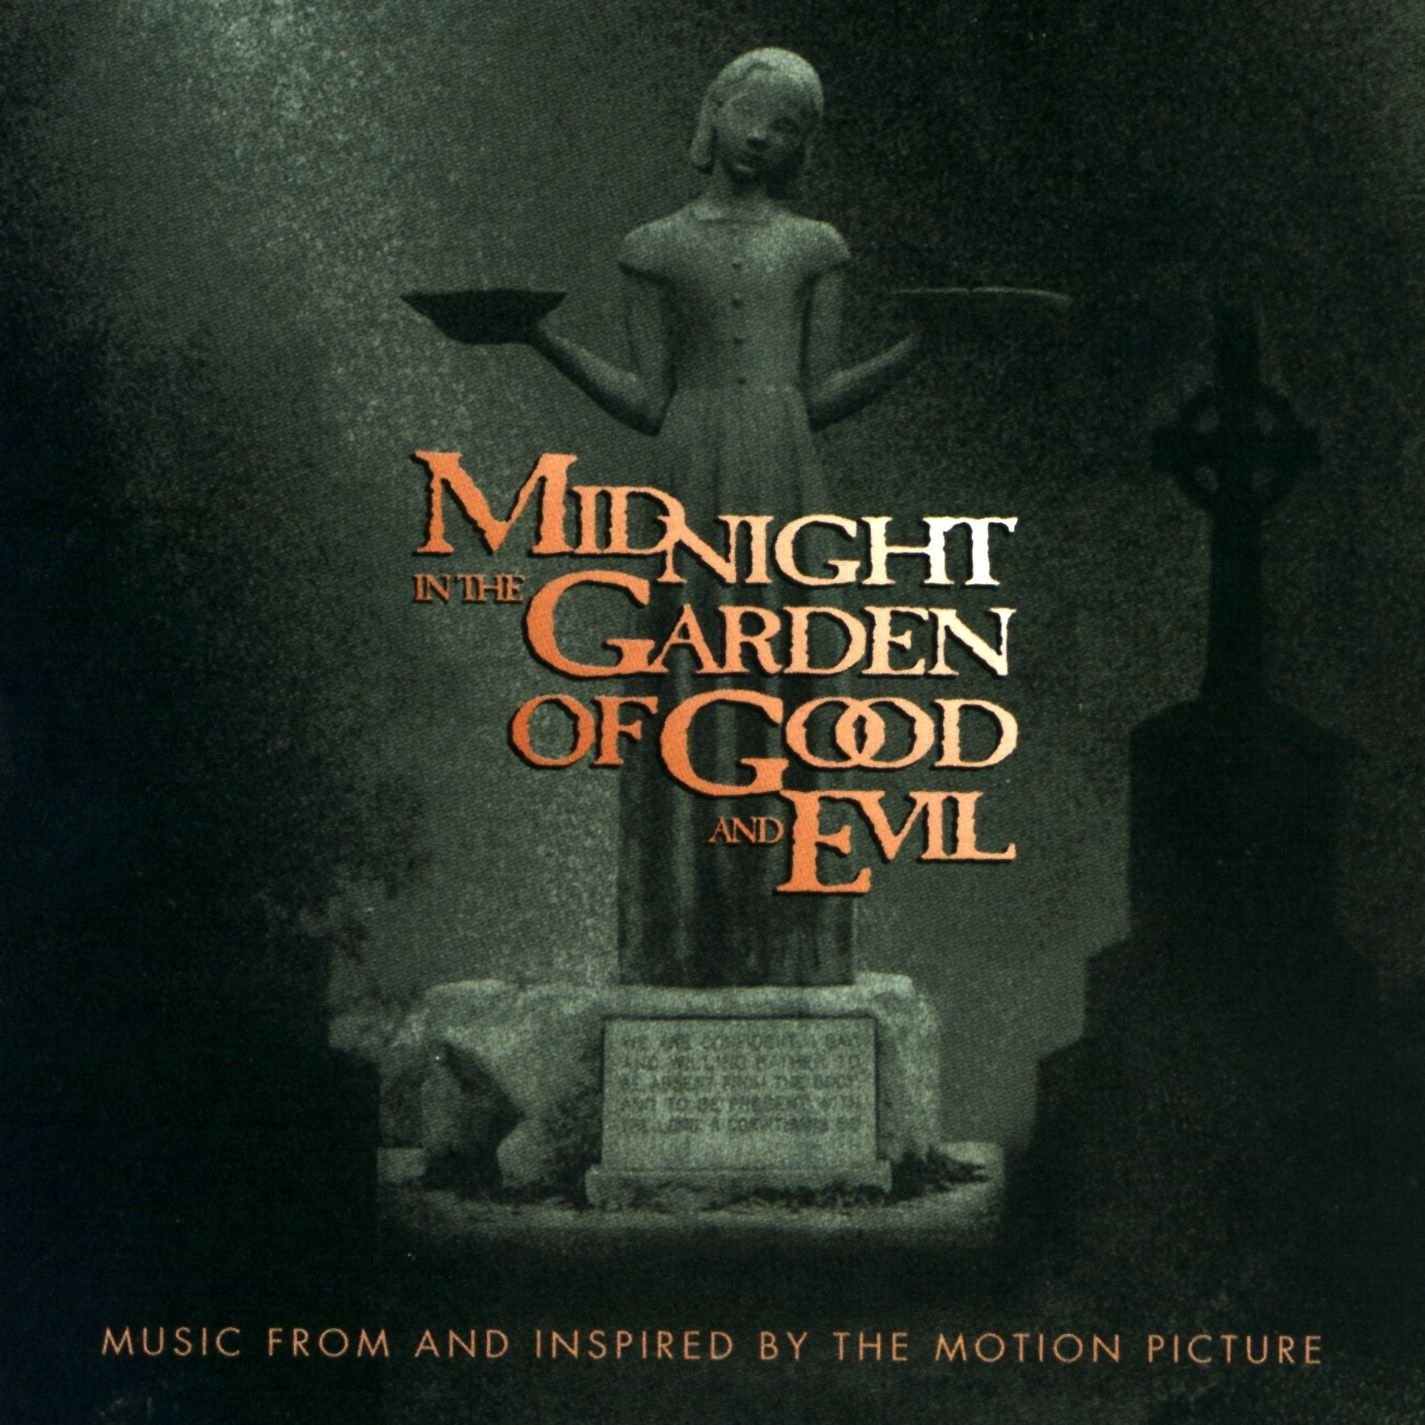 CD Shop - OST / VARIOUS ARTISTS RSD - MIDNIGHT IN THE GARDEN OF GOOD AND EVIL OST (GREEN & BLACK VINYL ALBUM)